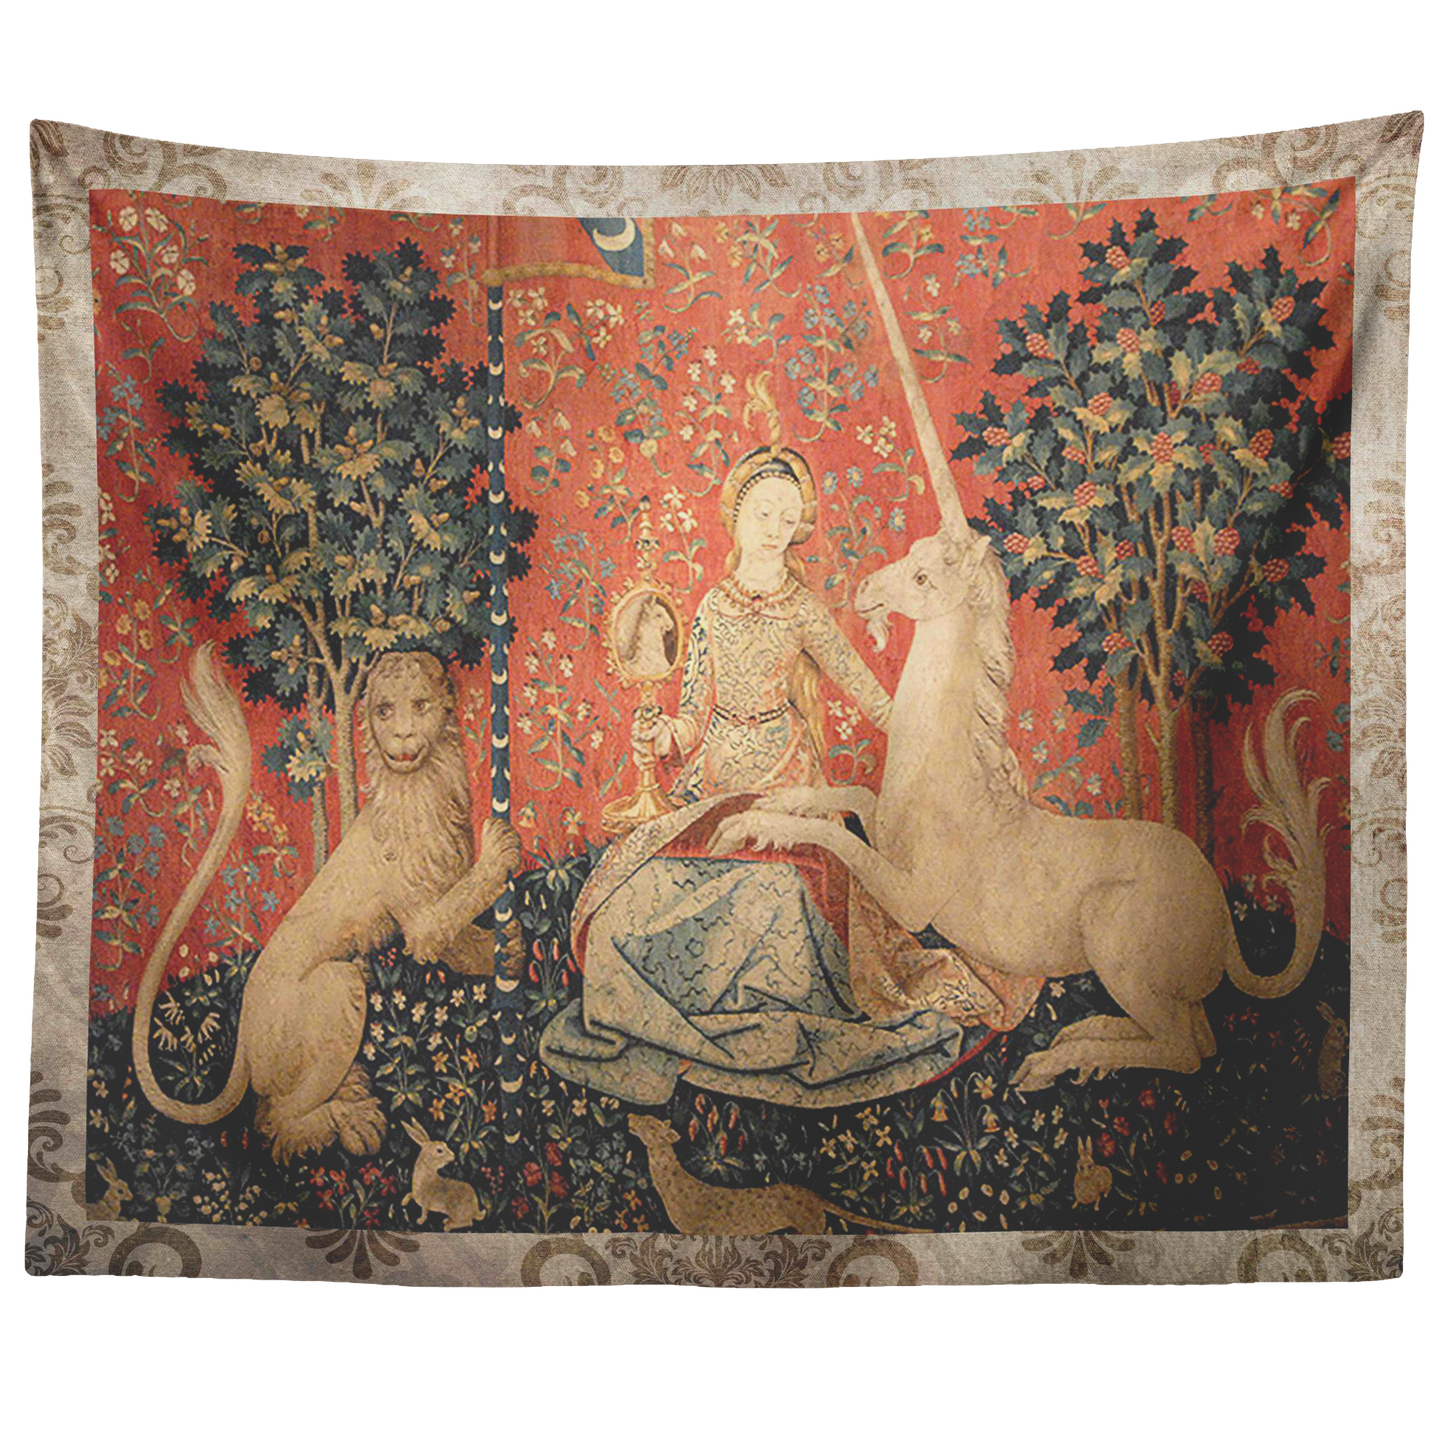 Unicorn Tapestry Wall Hanging - Medieval Tapestry - Medieval Decor